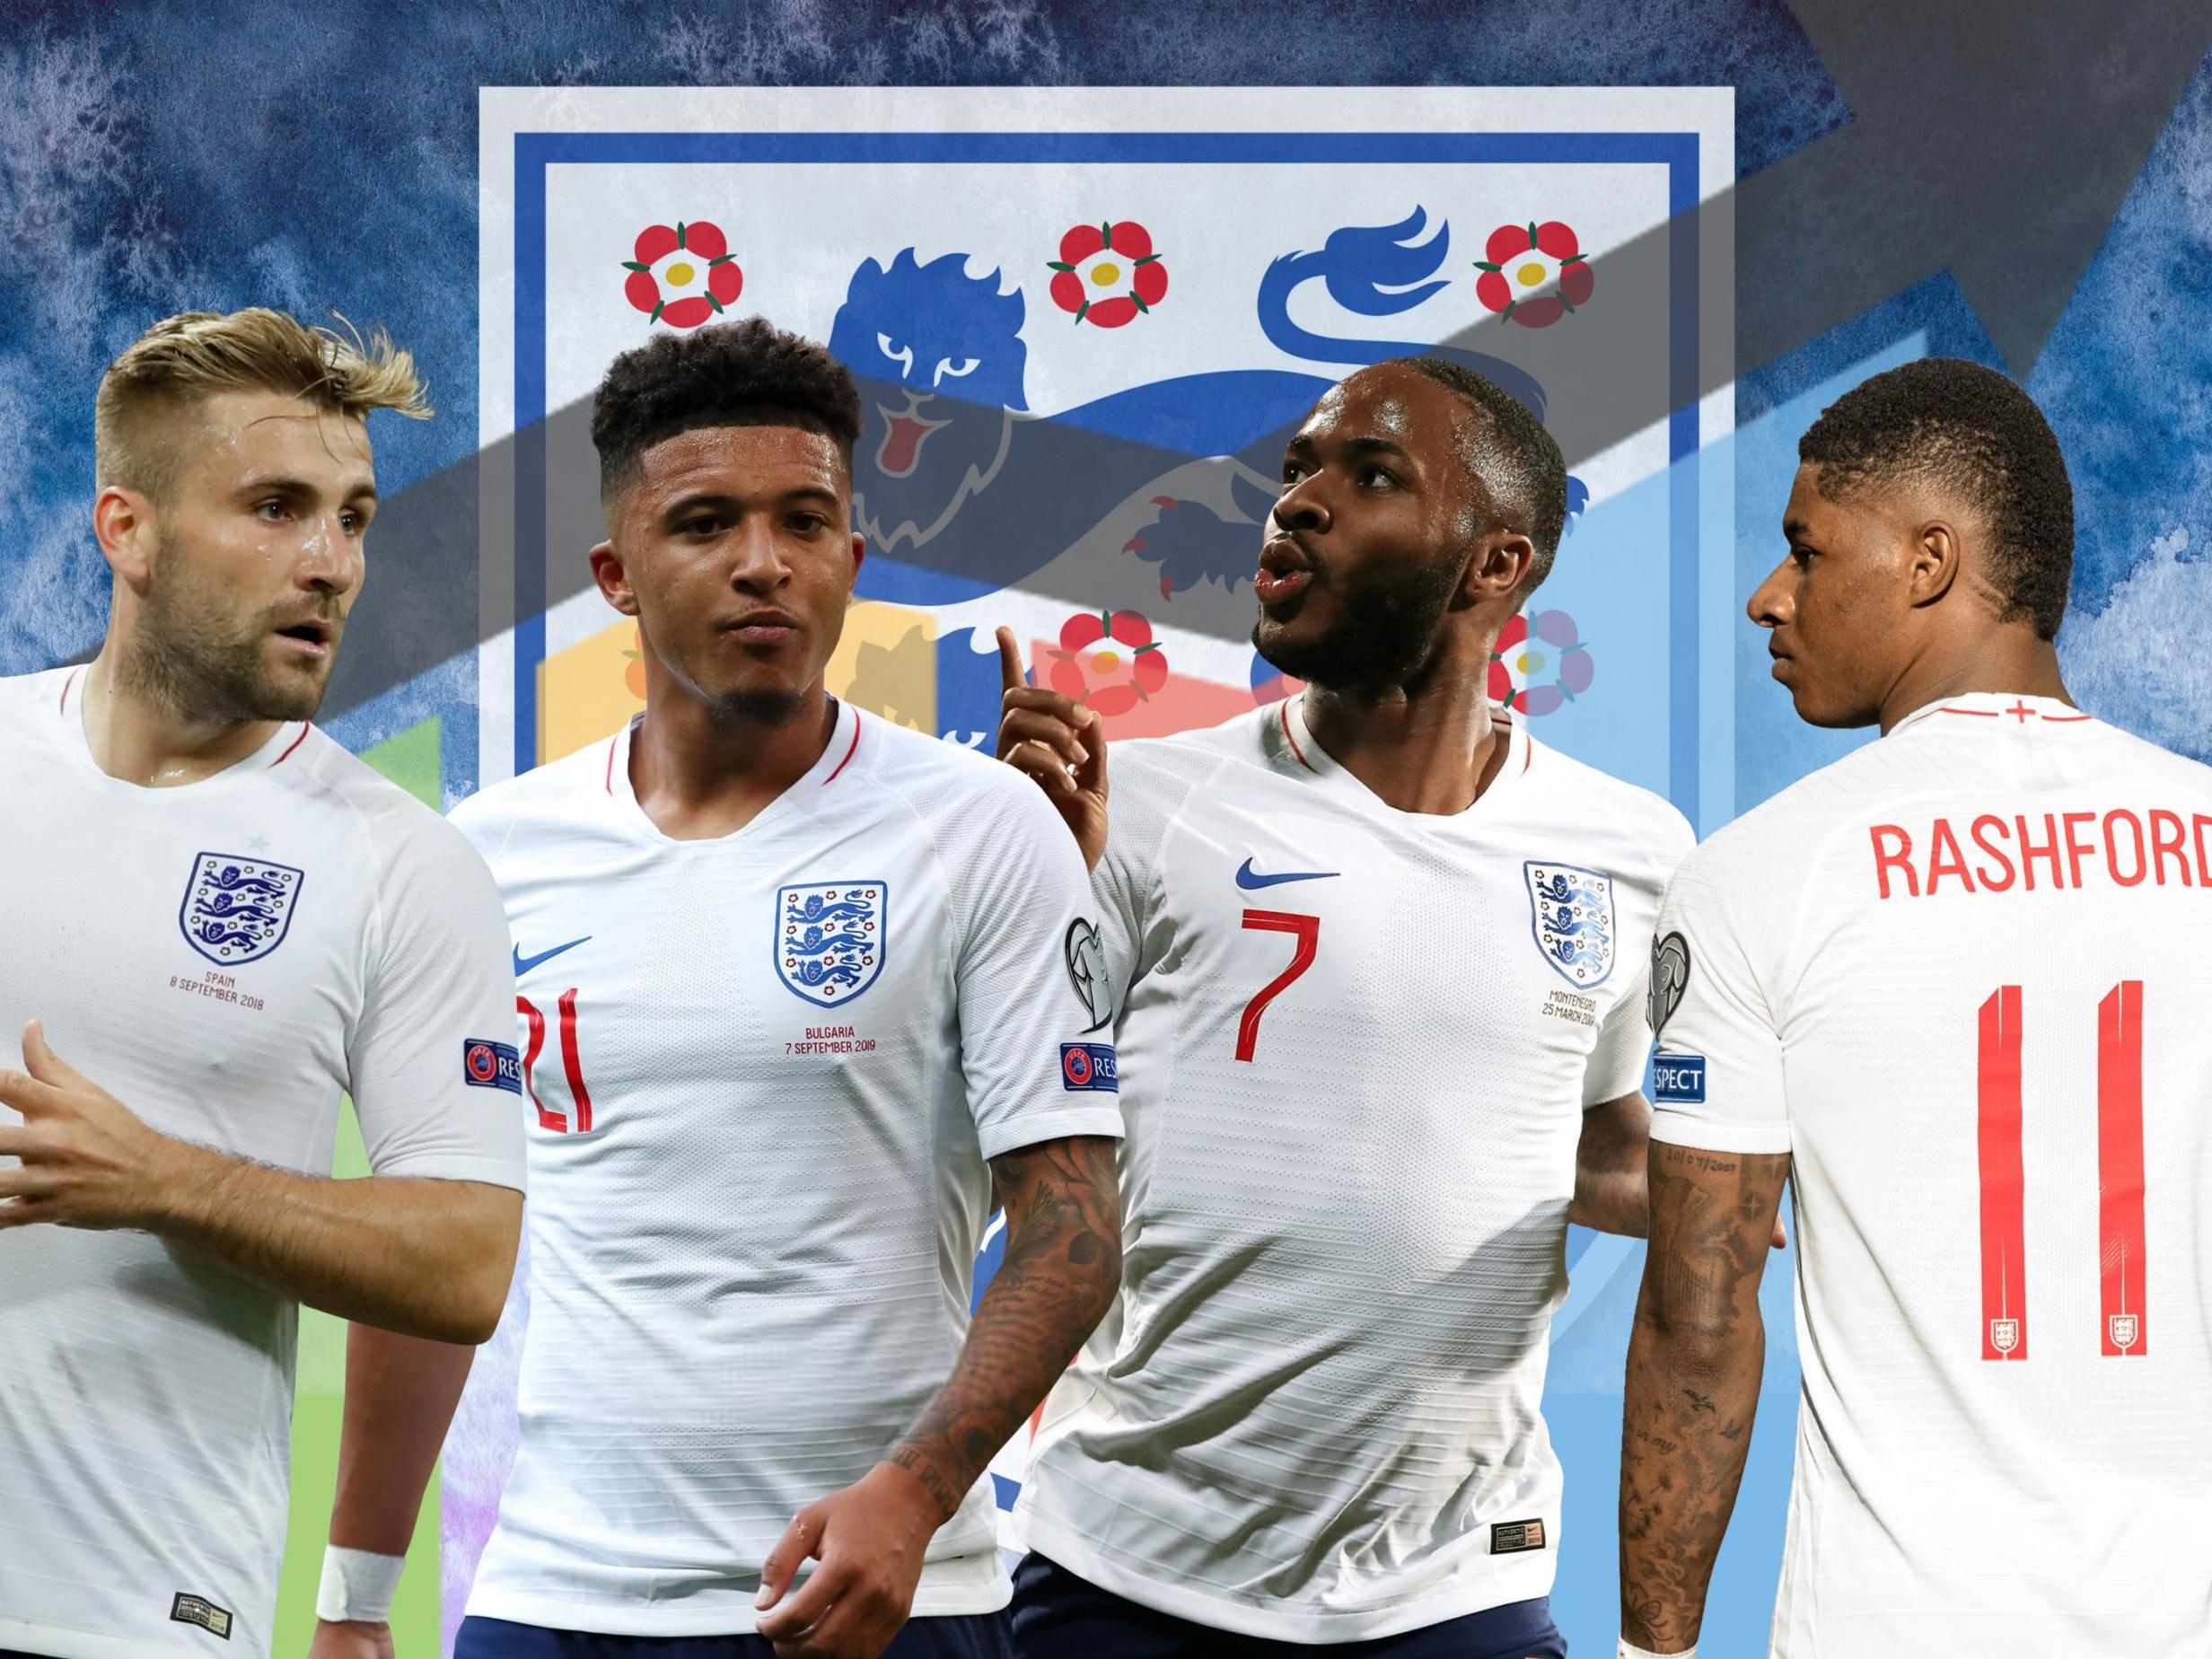 england players jersey numbers